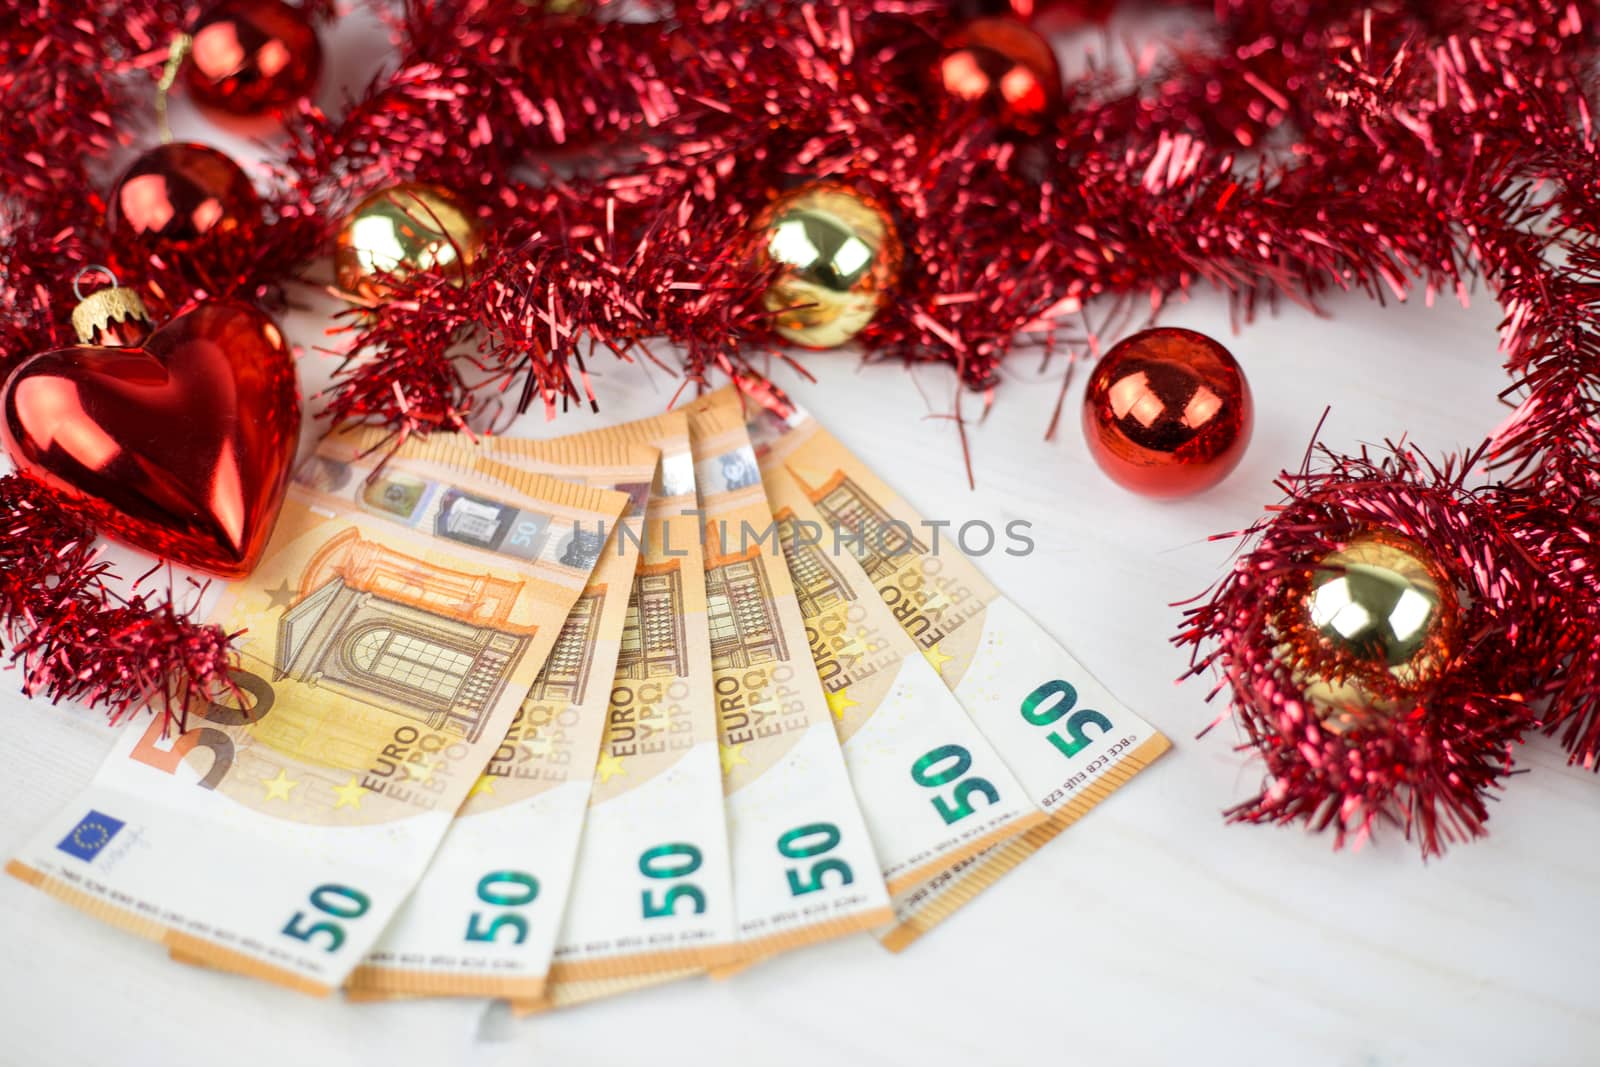 Christmas money business concept: some fifty euro banknotes with red and gold baubles and wreath decoration on light wooden table by robbyfontanesi